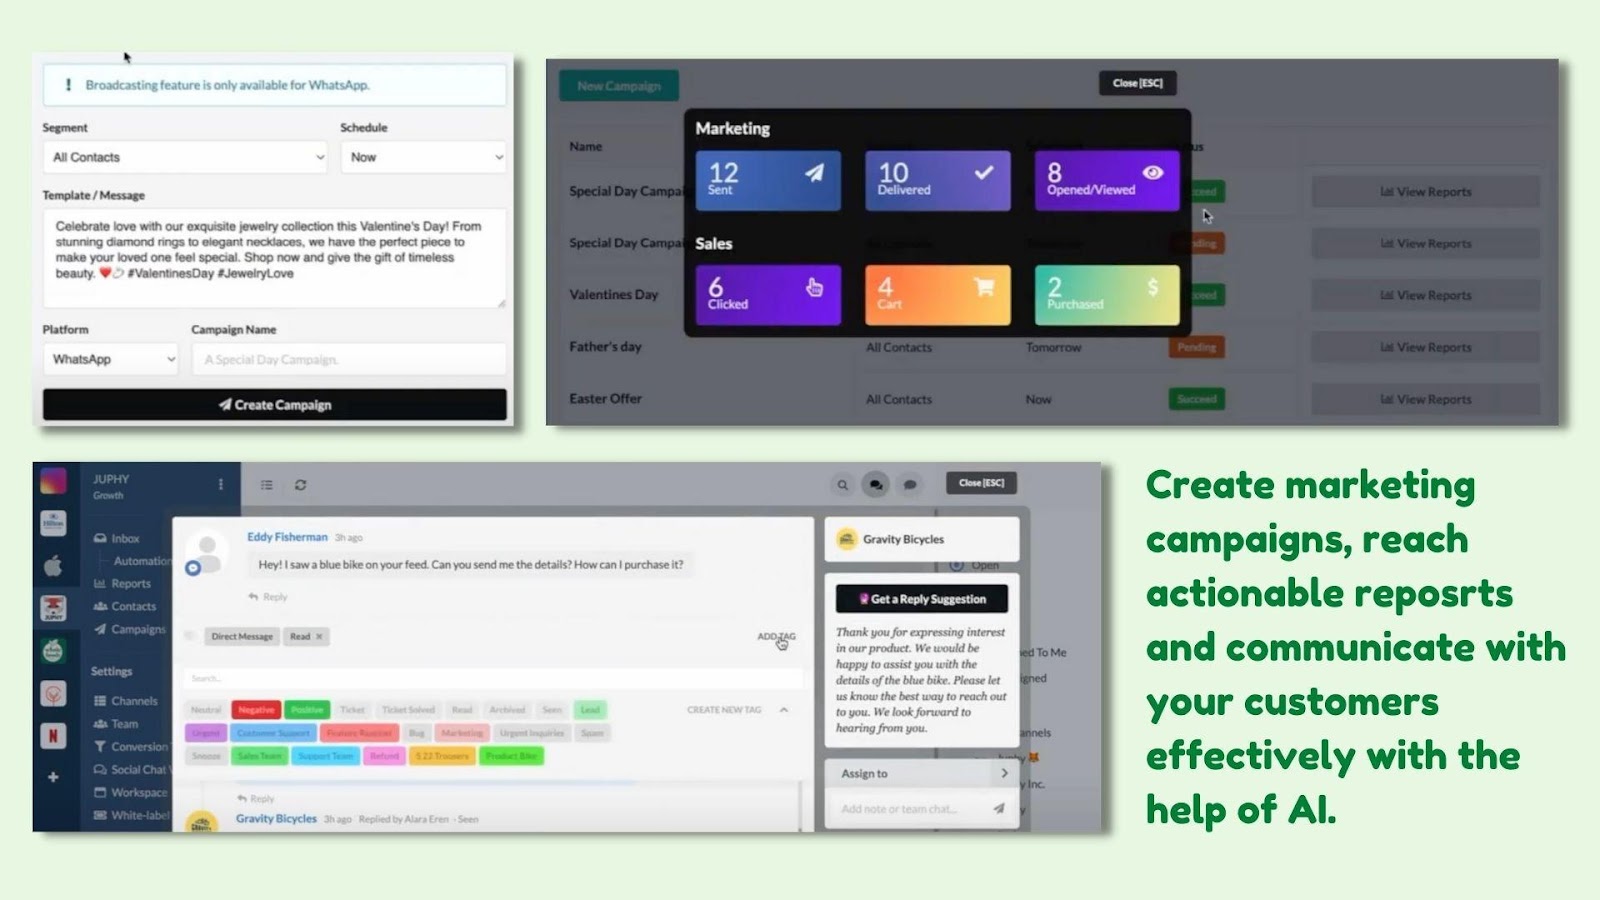 creenshots from Juphy’s WhatsApp broadcasting campaign and AI integration, accompanied by the sentence “Create marketing campaigns, reach actionable reports and communicate with your customers effectively with the help of AI.”